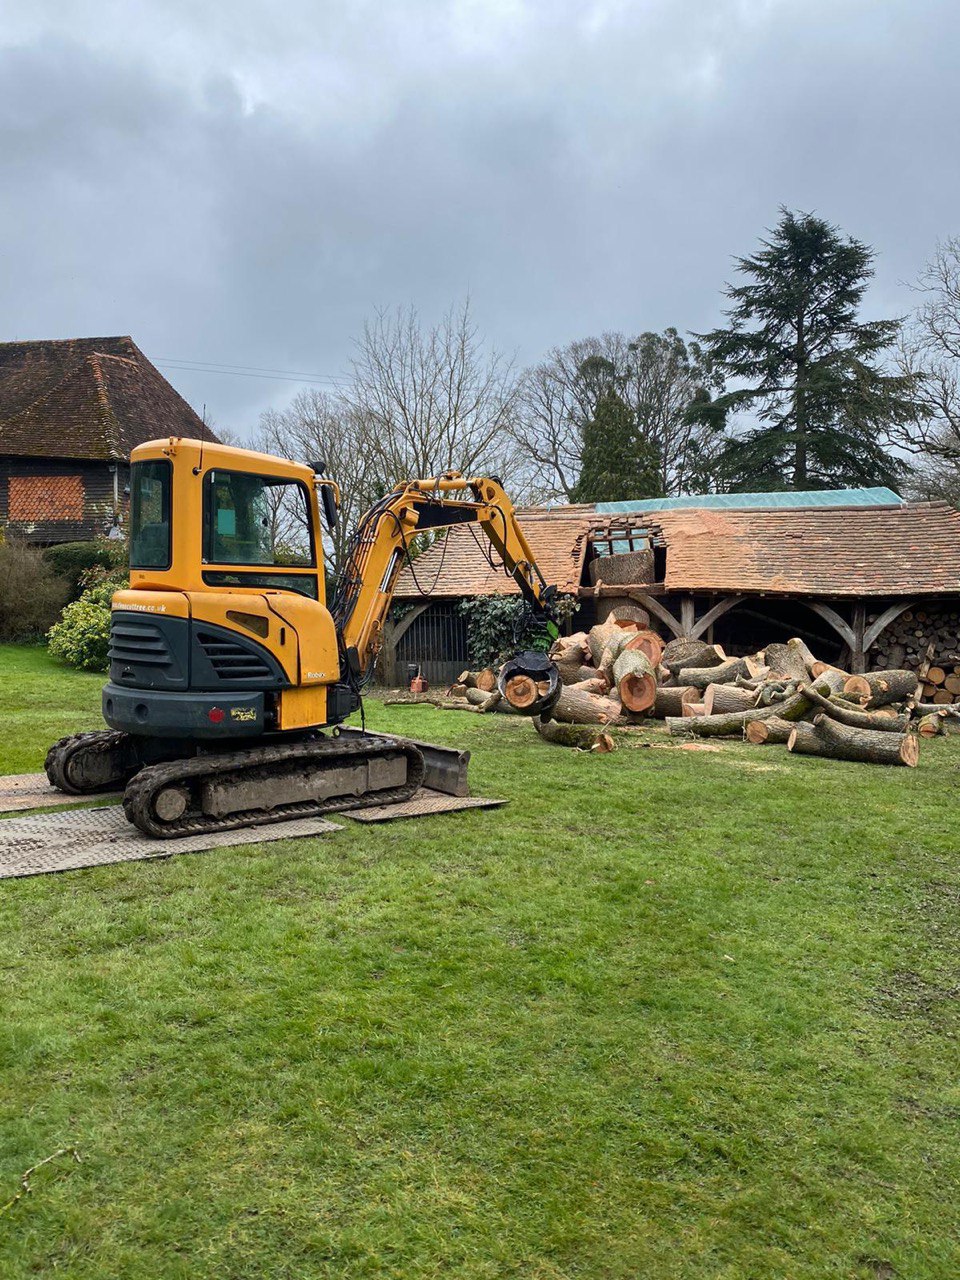 This is a photo of tree felling being carried out in Hawkhurst. All works are being undertaken by Hawkhurst Tree Surgeons